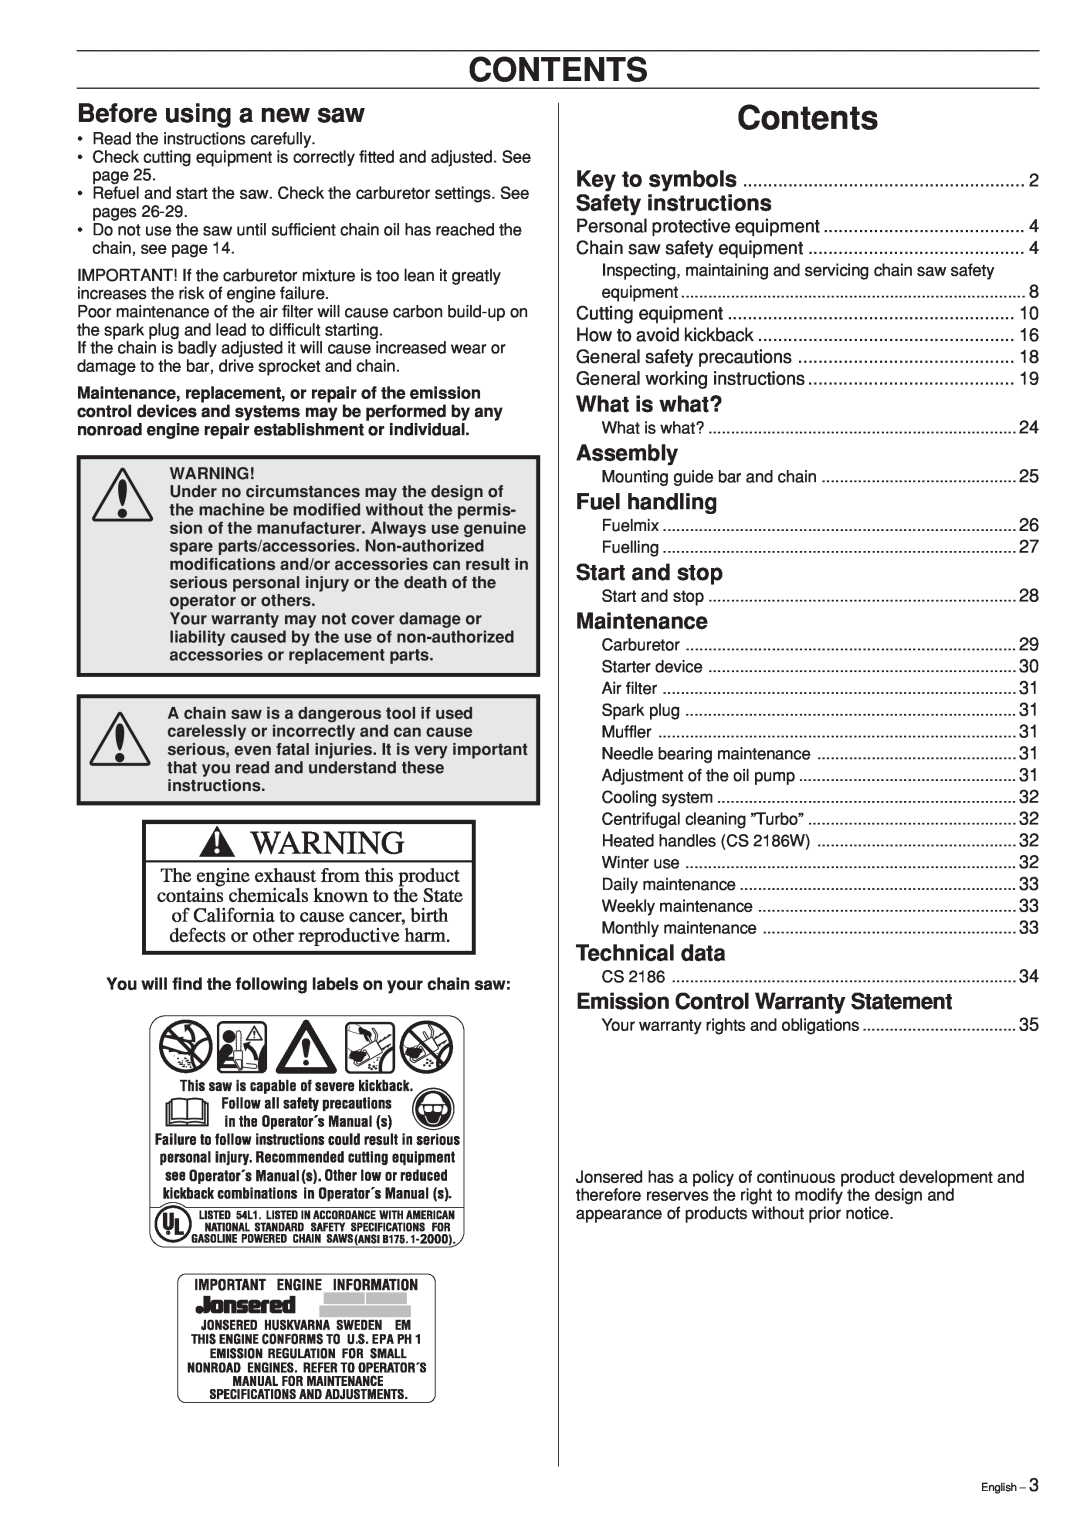 Jonsered CS 2186 manual Contents, Before using a new saw, Safety instructions, What is what?, Assembly, Fuel handling 